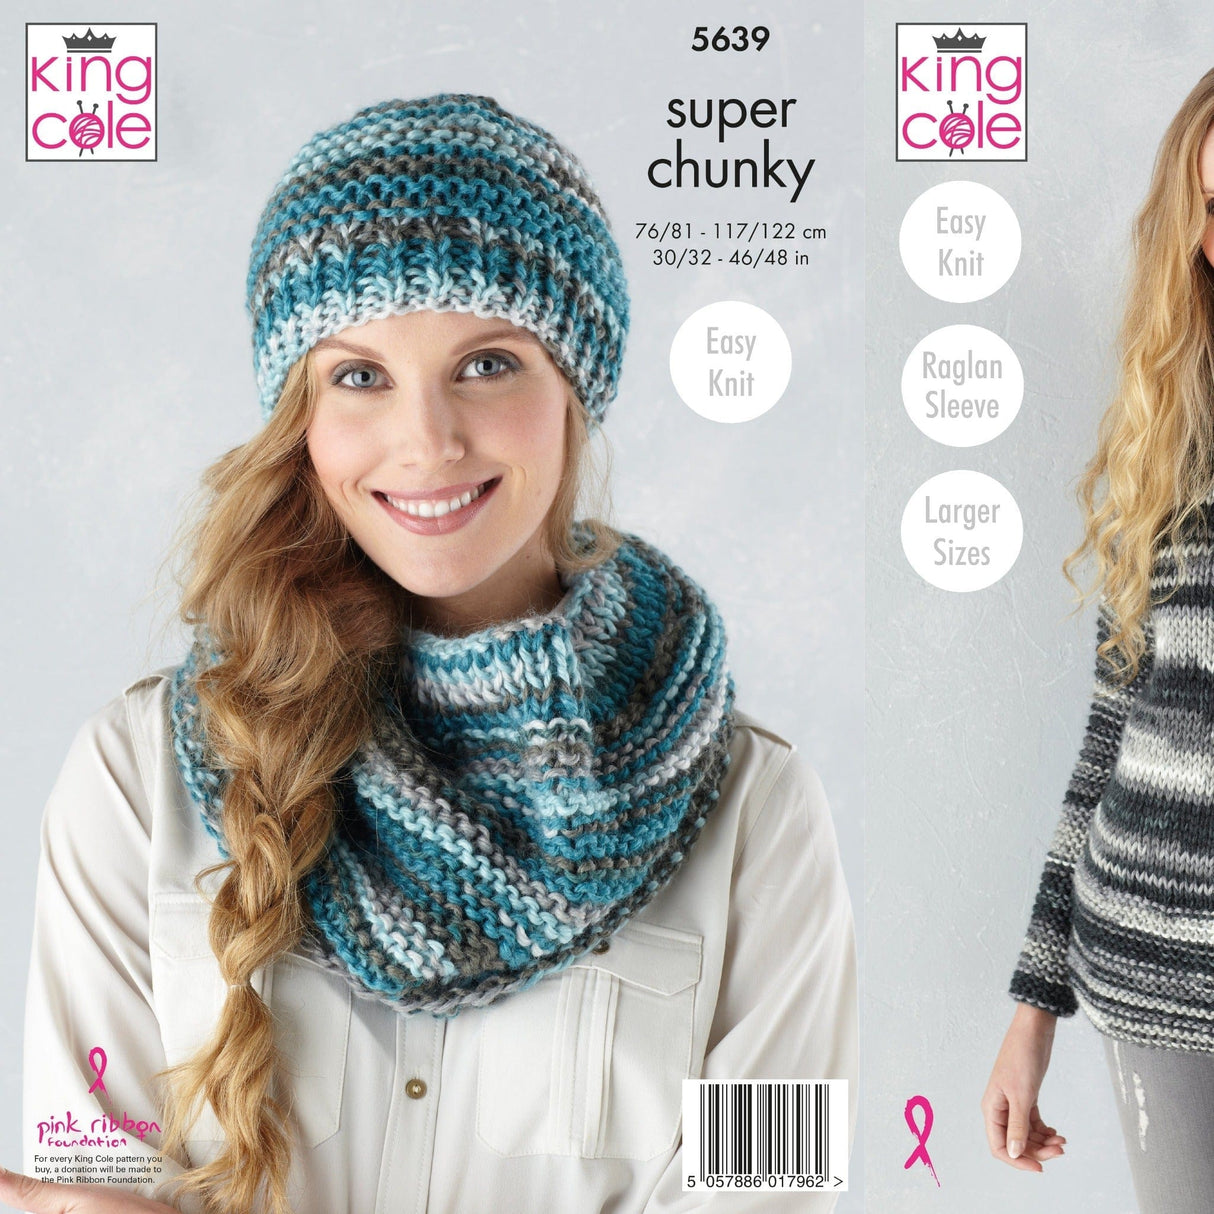 King Cole Patterns King Cole Ladies Sweater, Hat & Cowl Super Chunky Knitting Pattern 5639